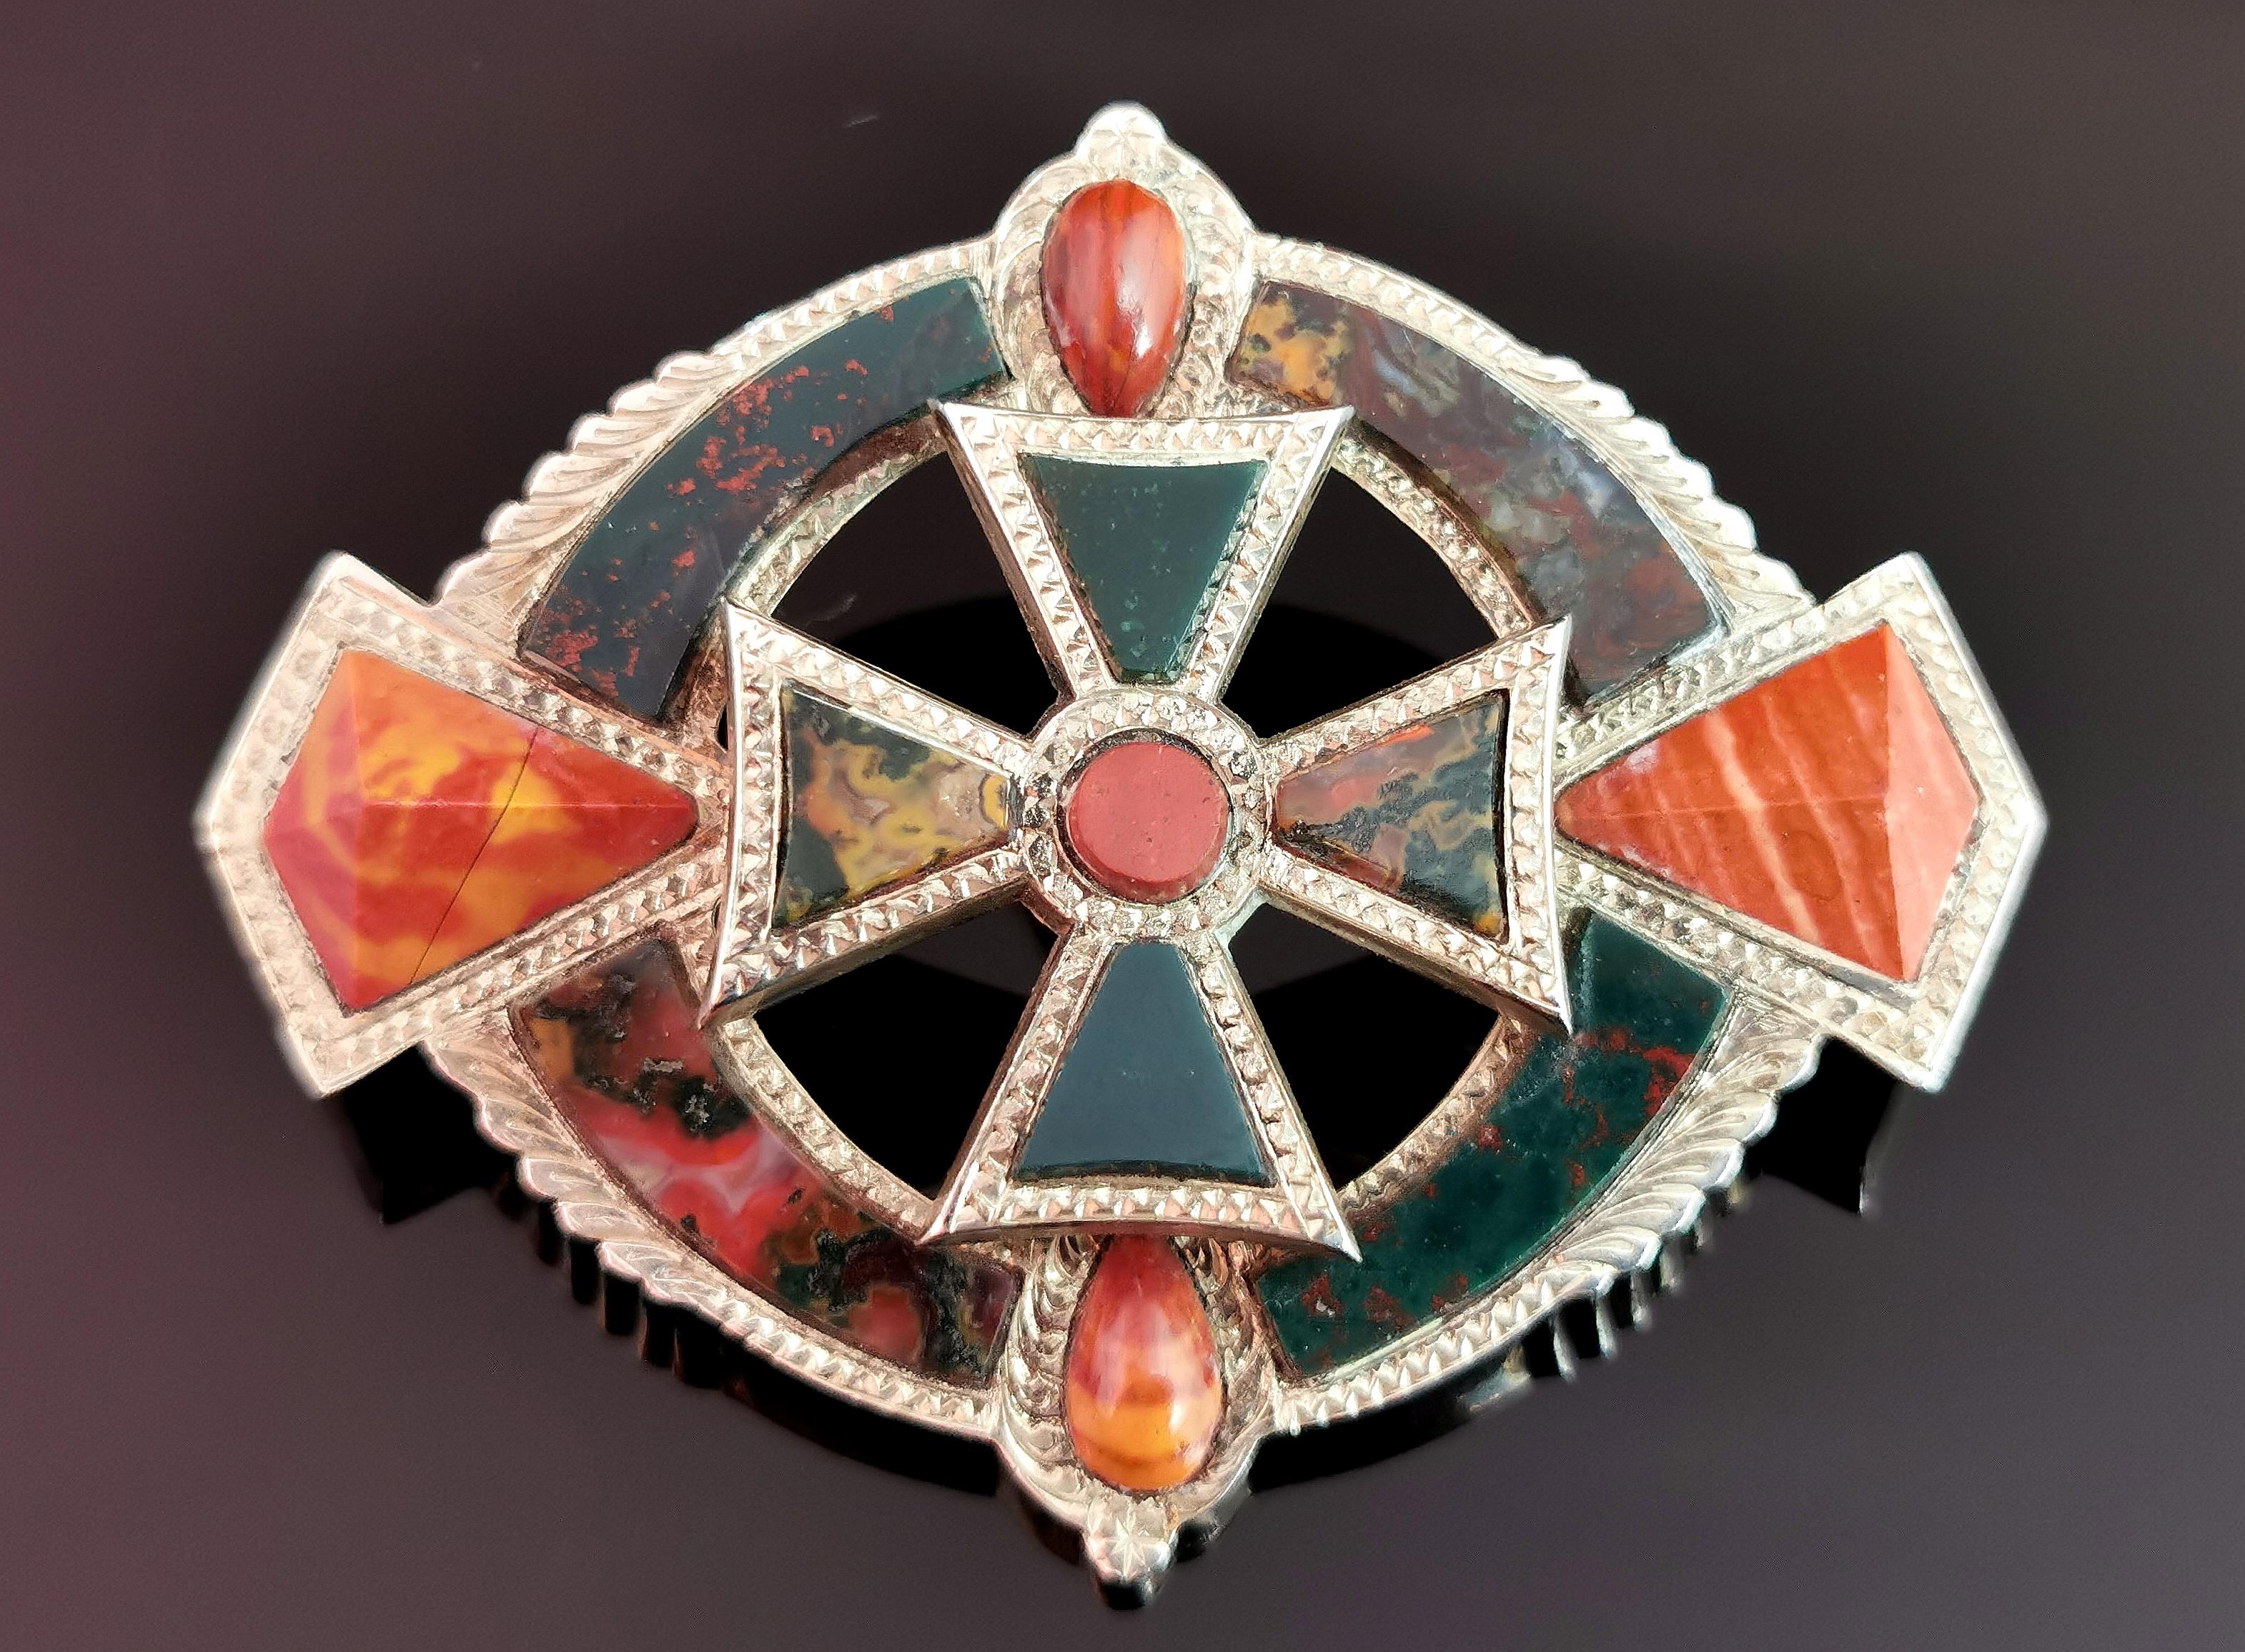 A gorgeous and grand antique, Scottish agate and Silver brooch.

It has an oval shape set with diamond shaped carved red Jasper each end and a tear drop cabochon top and bottom, a very interesting design.

The centre has a celtic cross set with